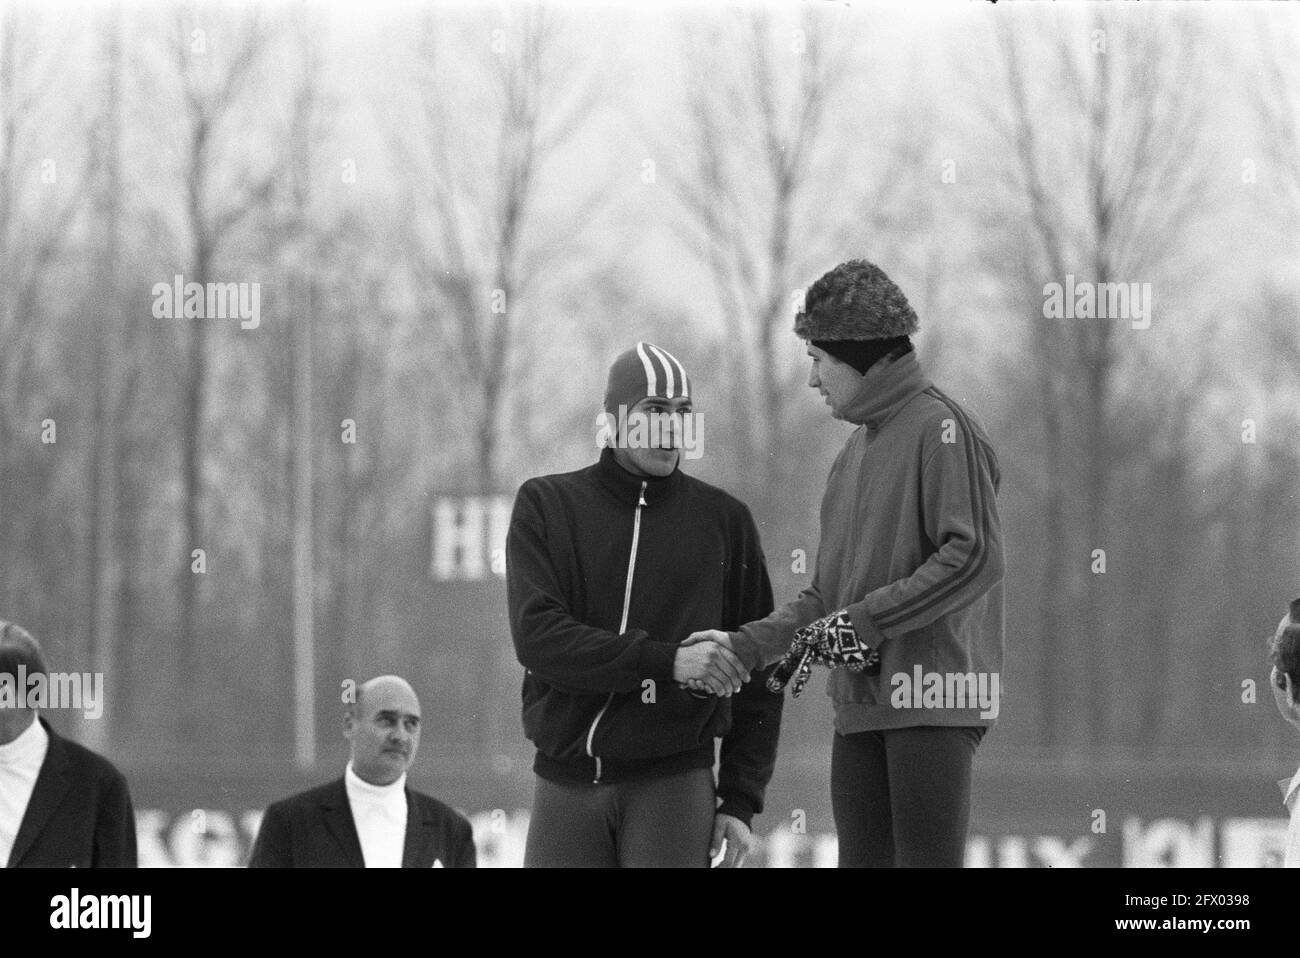 Skating competitions for the IJsselcup in Deventer. Ard Schenk (left), winner 500m, congratulates Kees Verkerk, winner 1500m, November 22, 1969, WEDSTRIJDEN, Winners, skating, sport, The Netherlands, 20th century press agency photo, news to remember, documentary, historic photography 1945-1990, visual stories, human history of the Twentieth Century, capturing moments in time Stock Photo